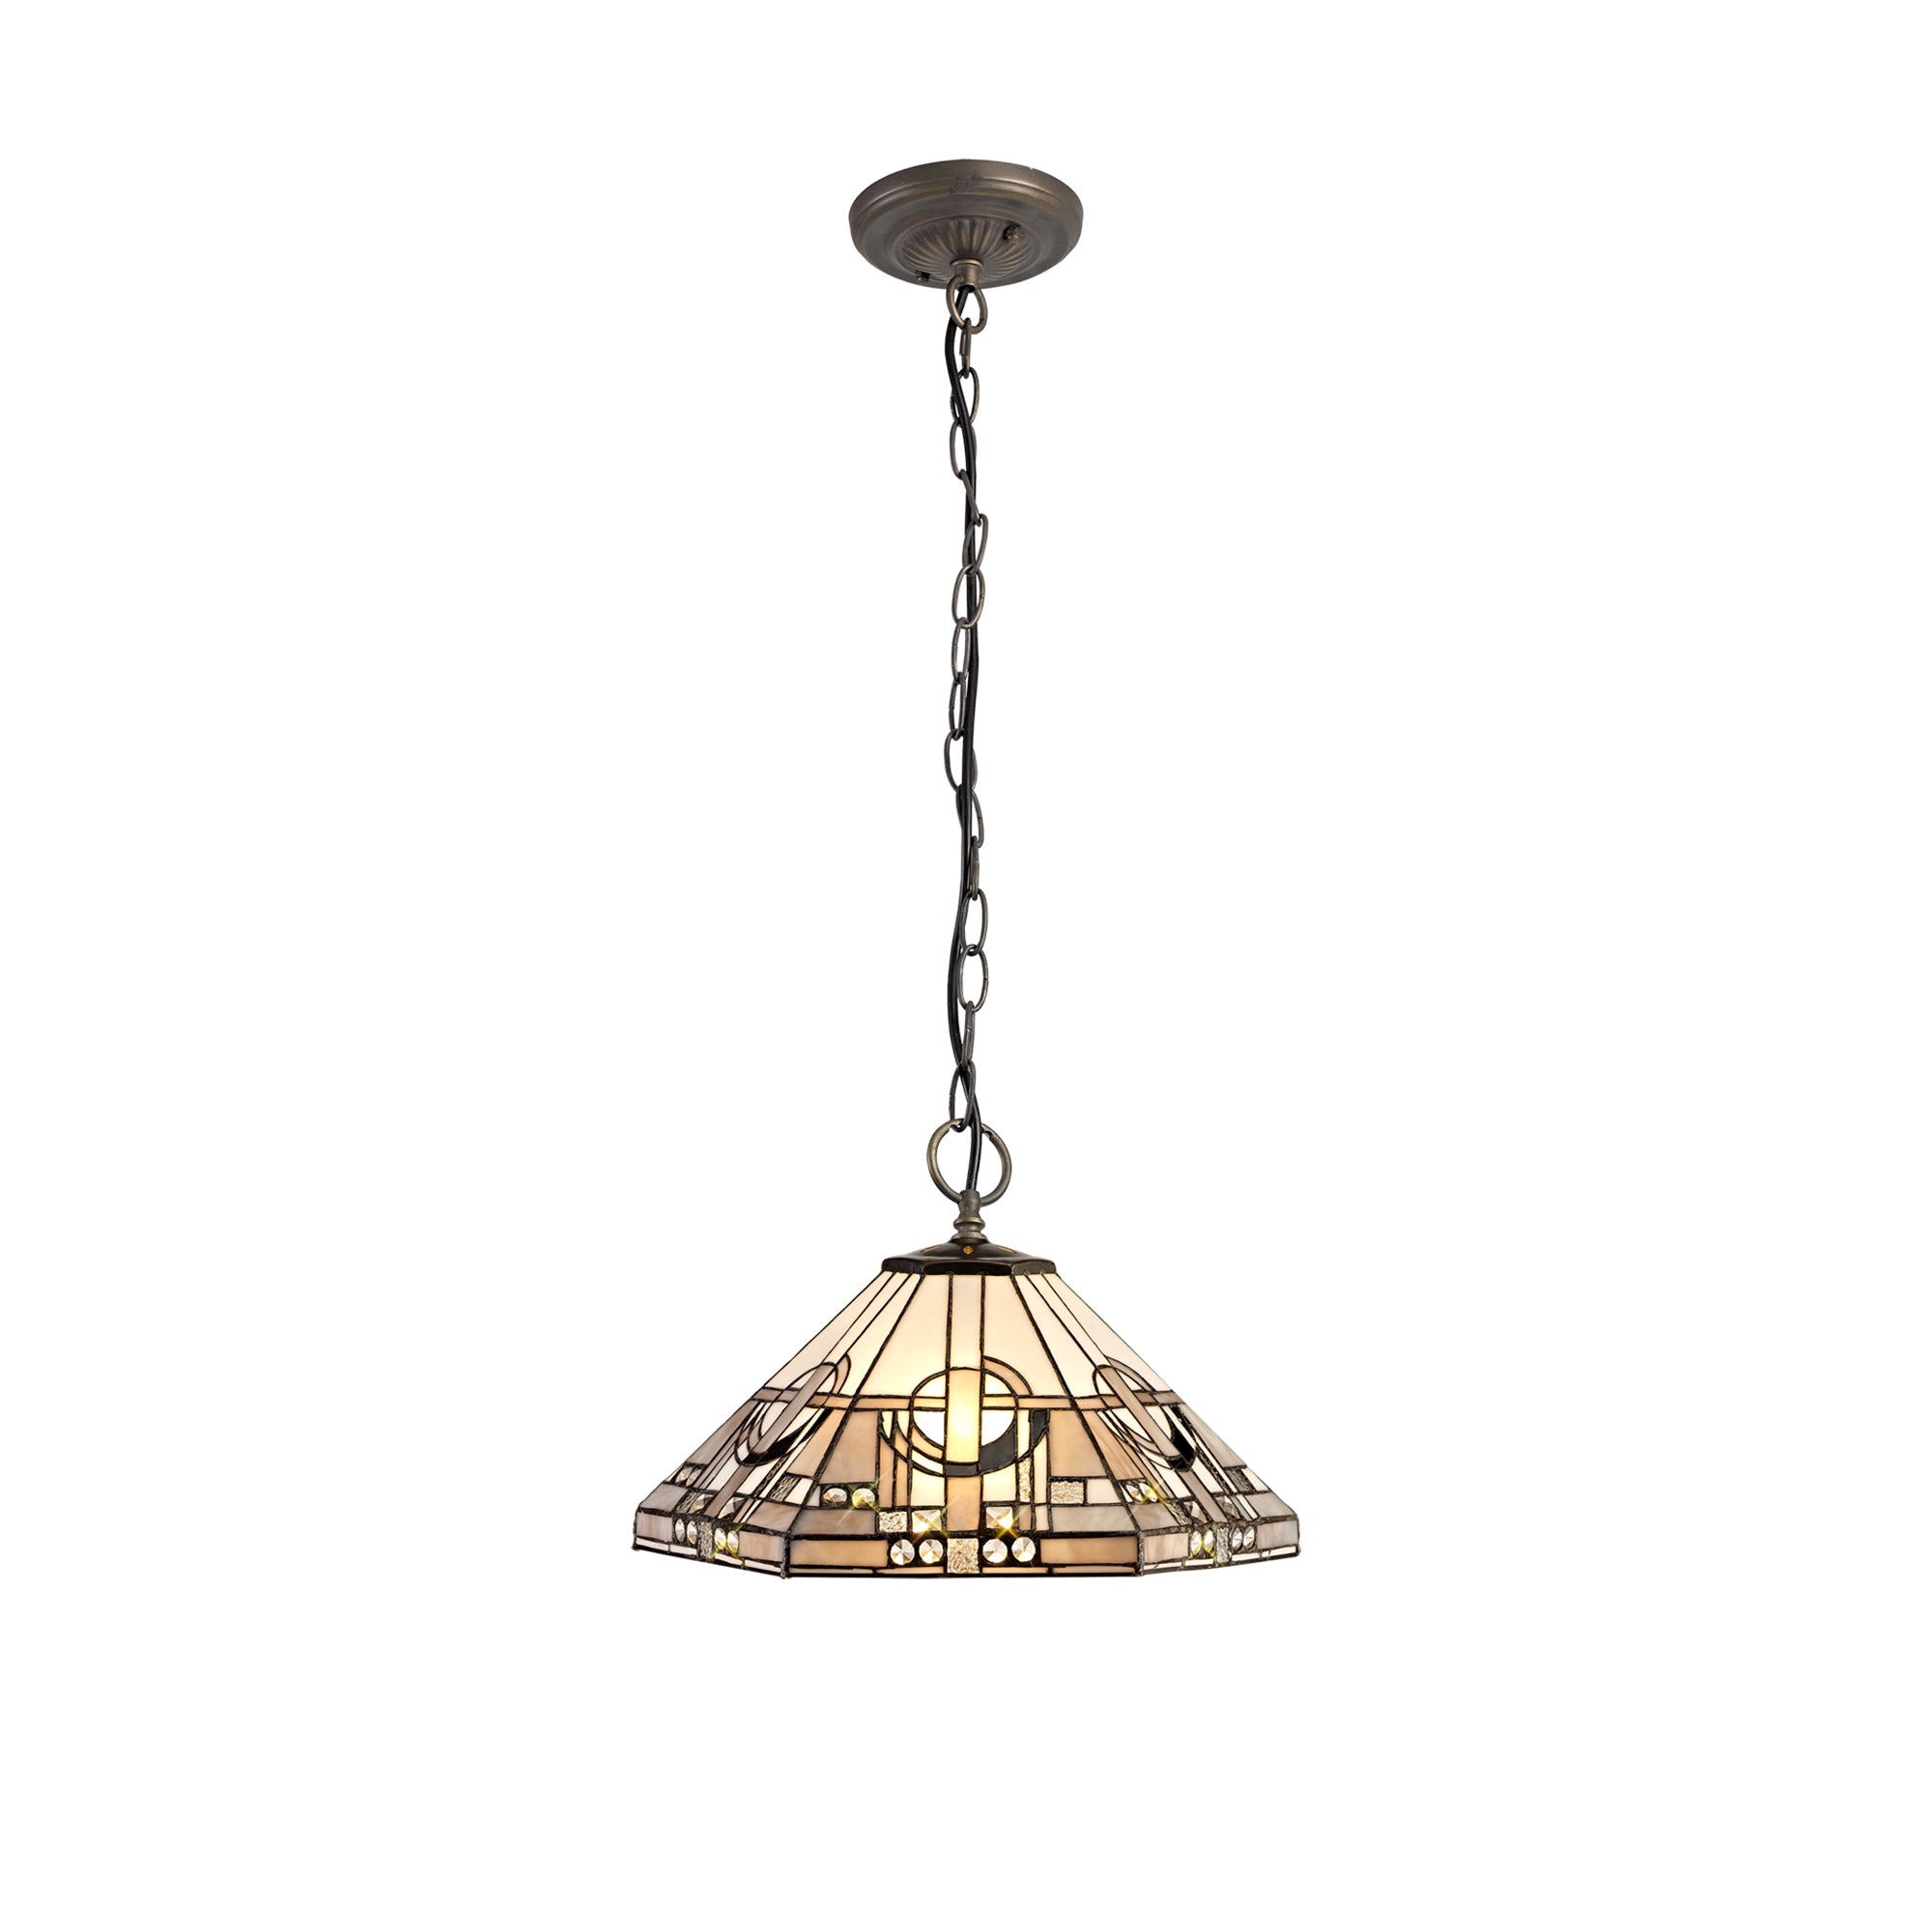 Atek 3 Light Downlighter tiffany Pendant E27 With 40cm Tiffany Shade, White/Grey/Black/Clear Crystal/Aged Antique Brass